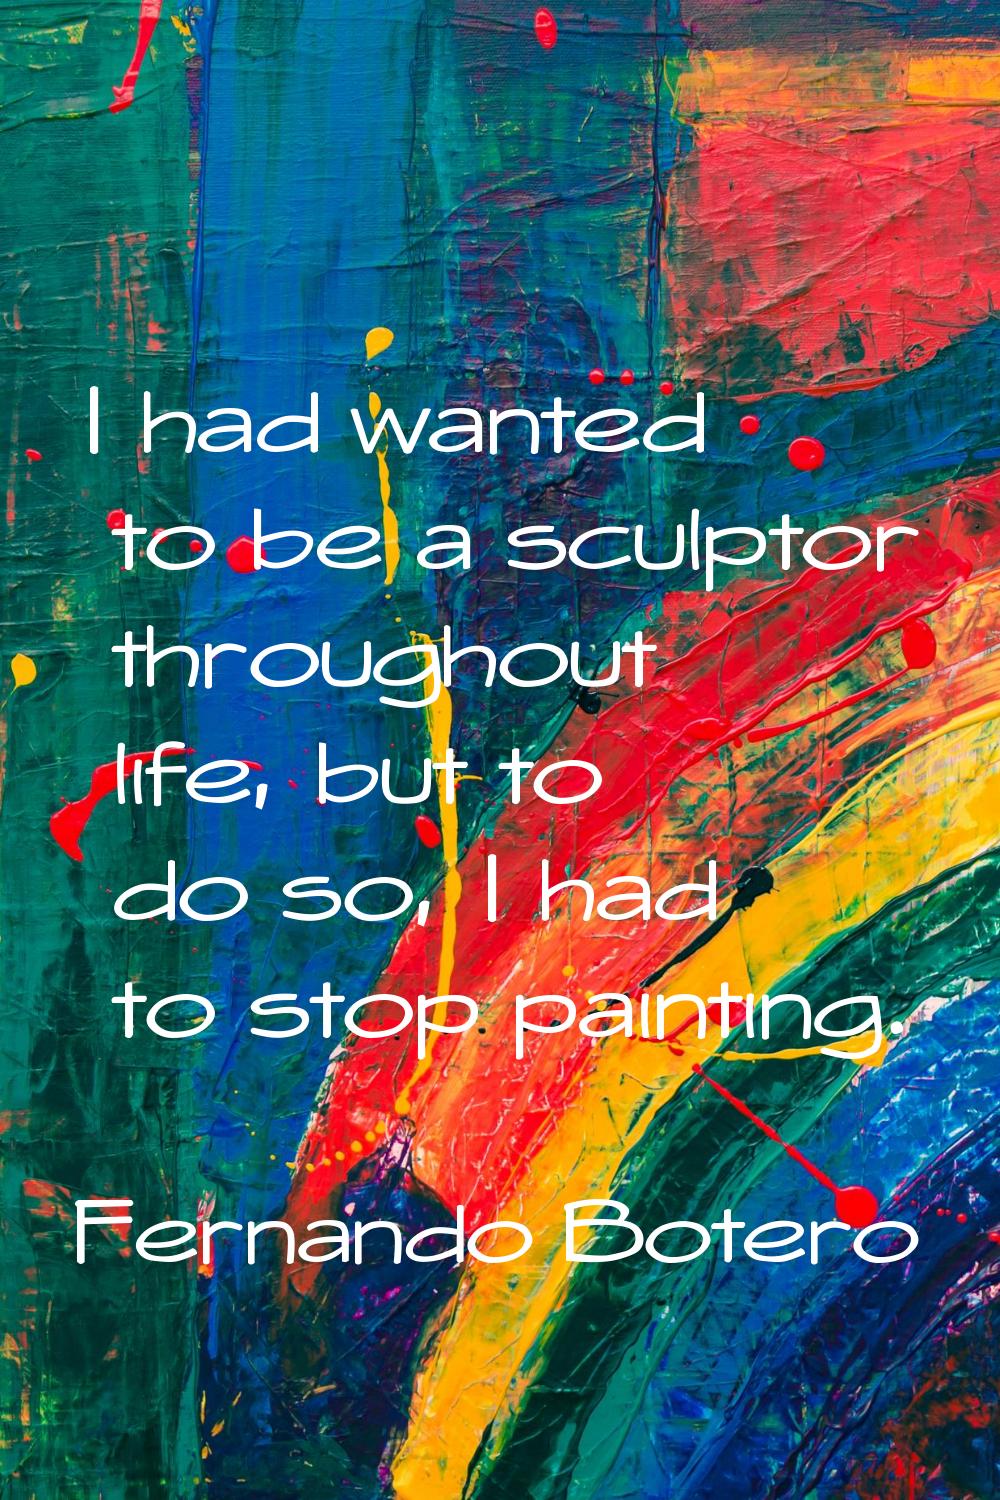 I had wanted to be a sculptor throughout life, but to do so, I had to stop painting.